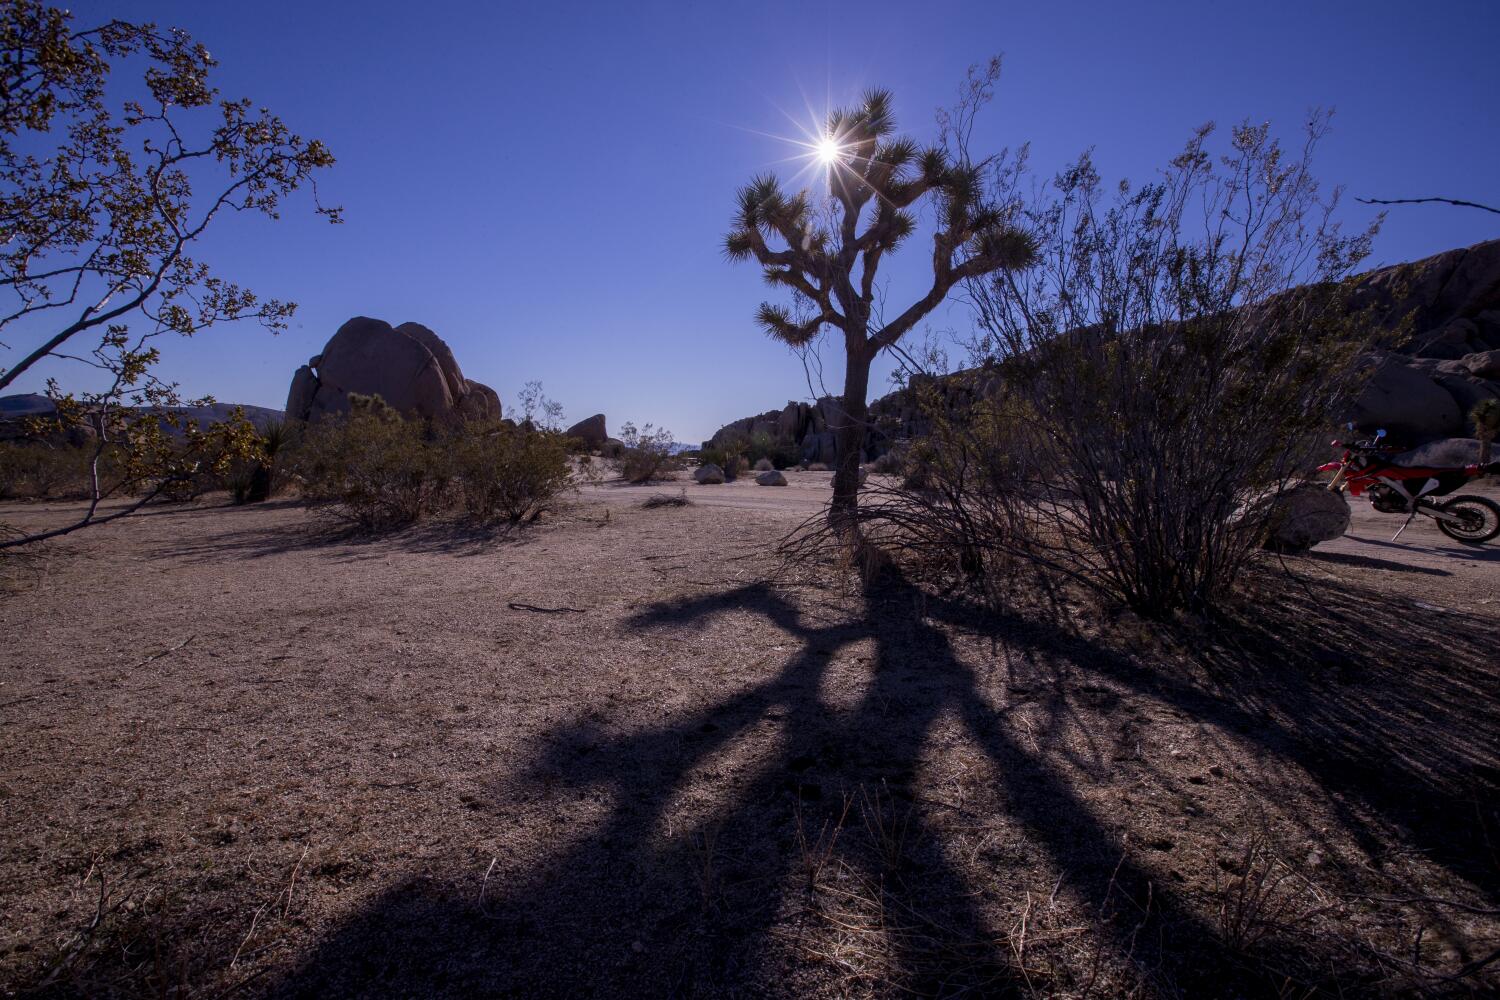 Fire risk closes section of Joshua Tree National Park over July 4 weekend